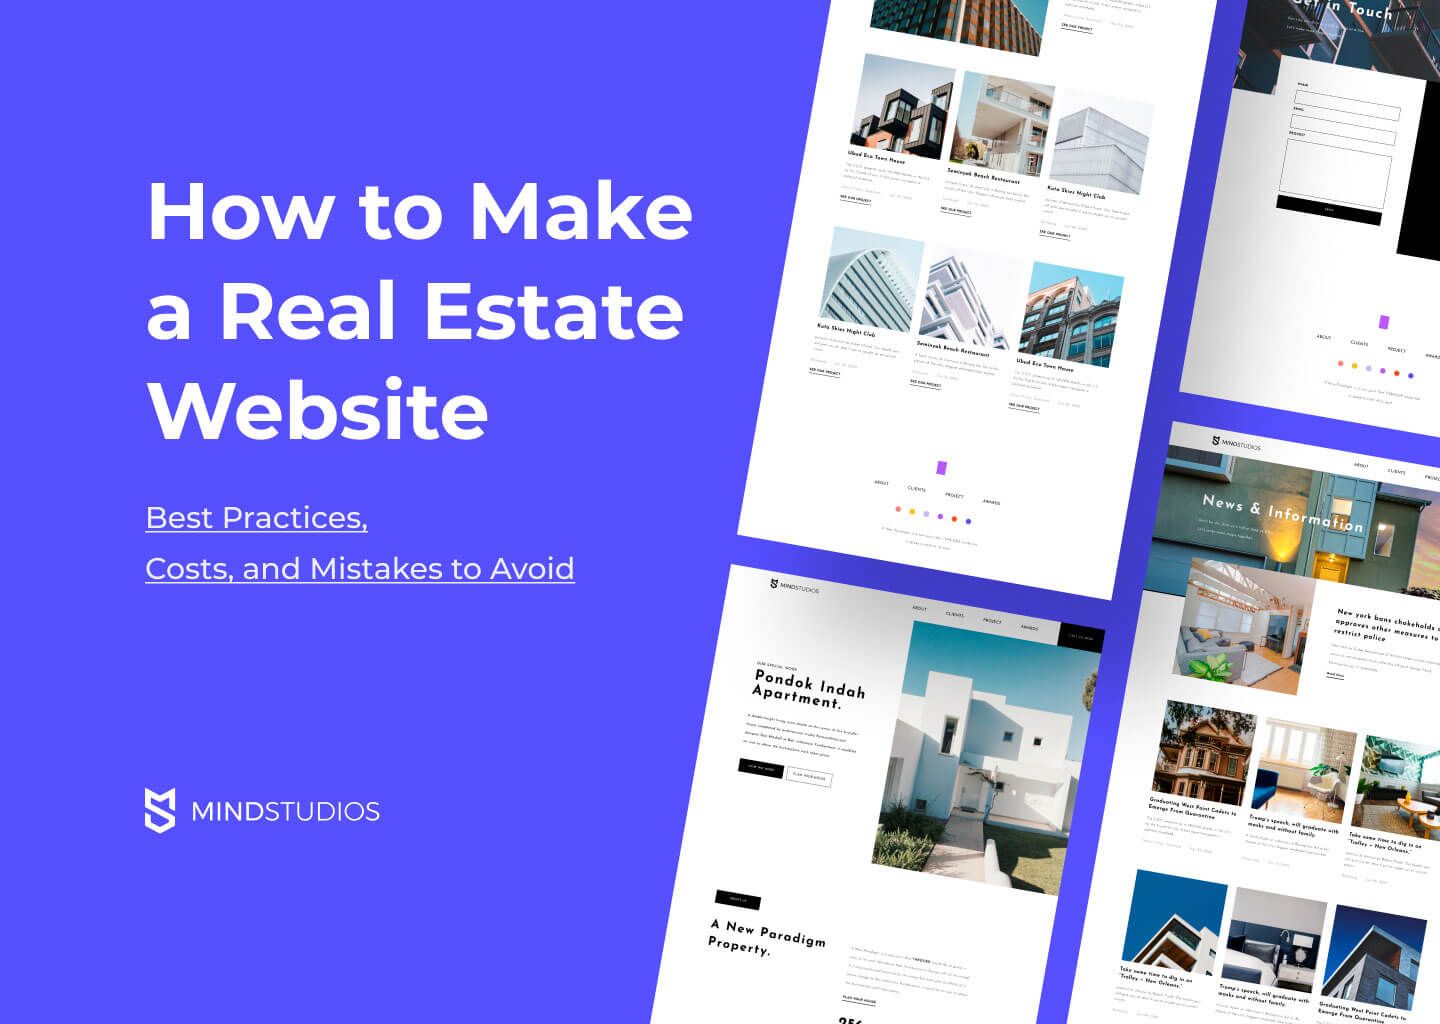 Top 10 Real Estate Marketing Tools of 2016 - ReadyChatReadyChat